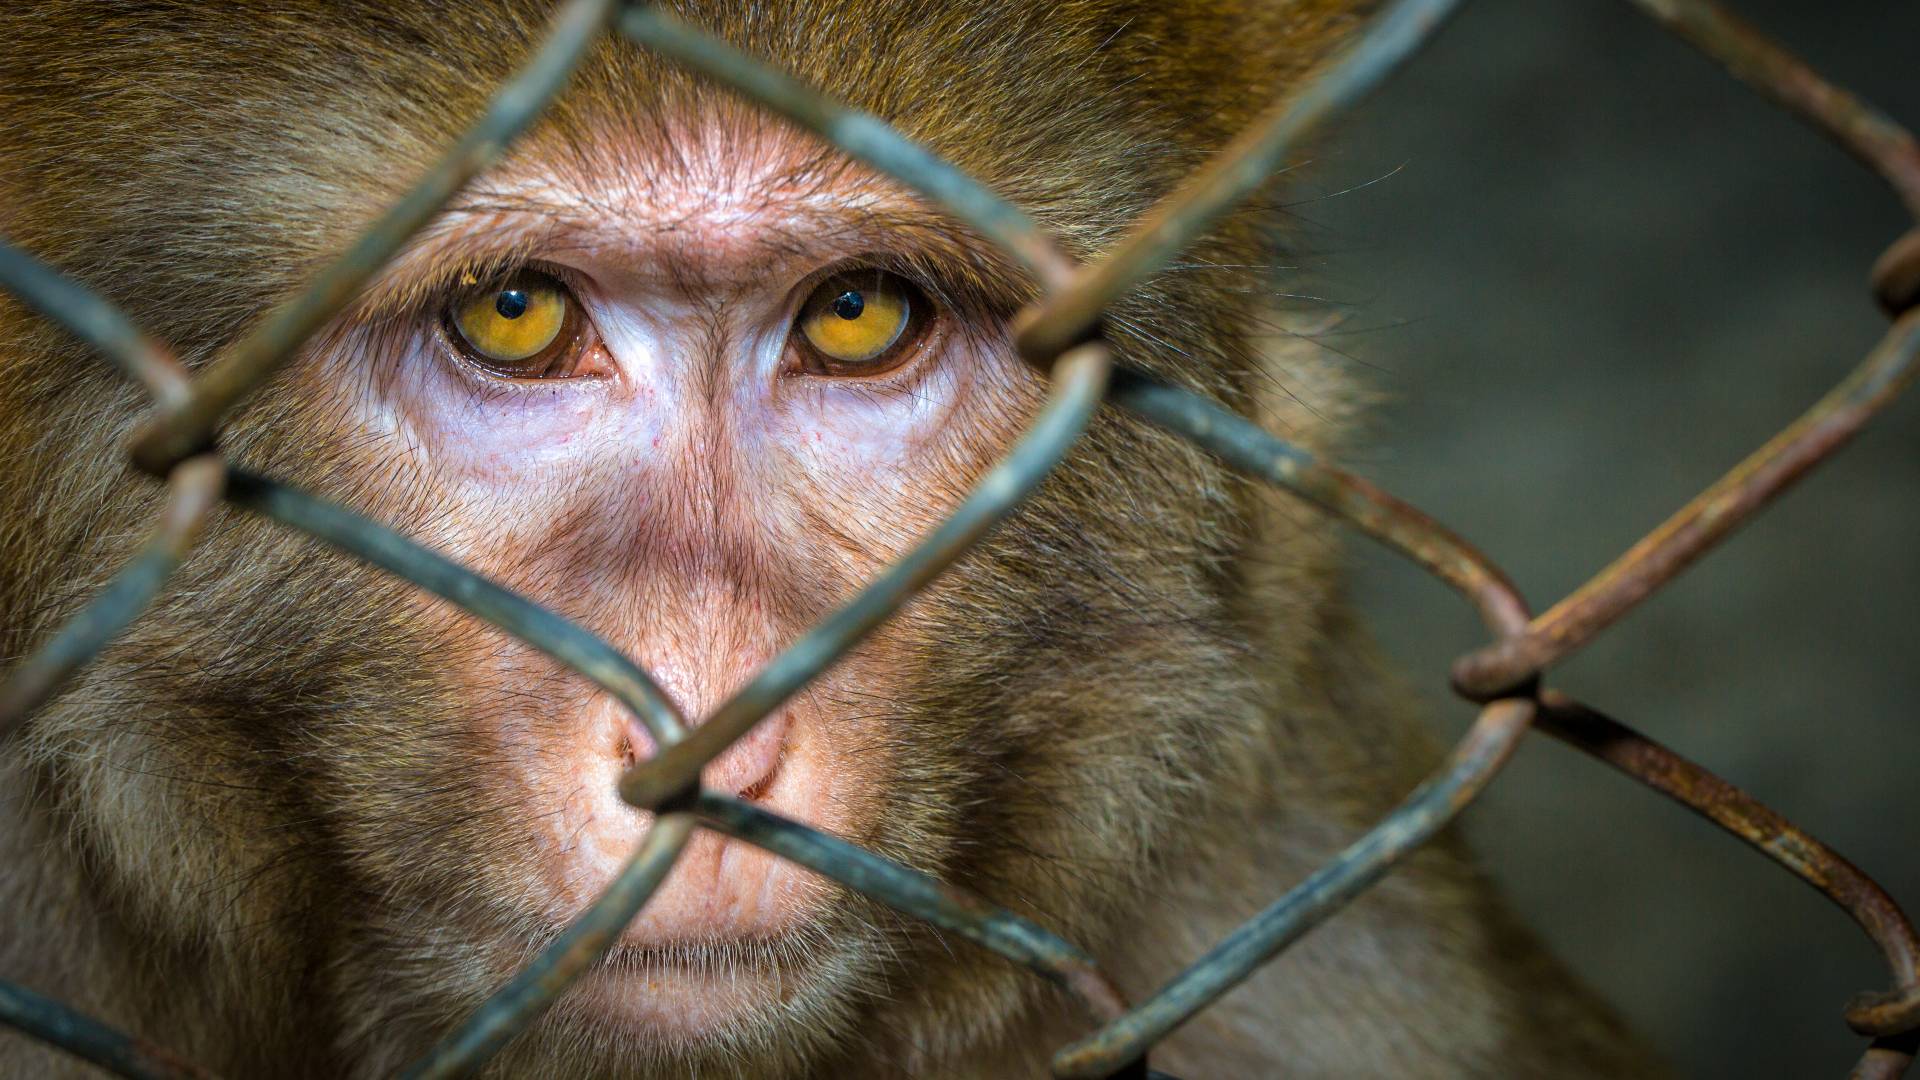 Physicians Committee’s Lawsuit Against Elon Musk Company Neuralink Reveals Existence of Hundreds of Photos of Monkeys Used in Painful Experiments